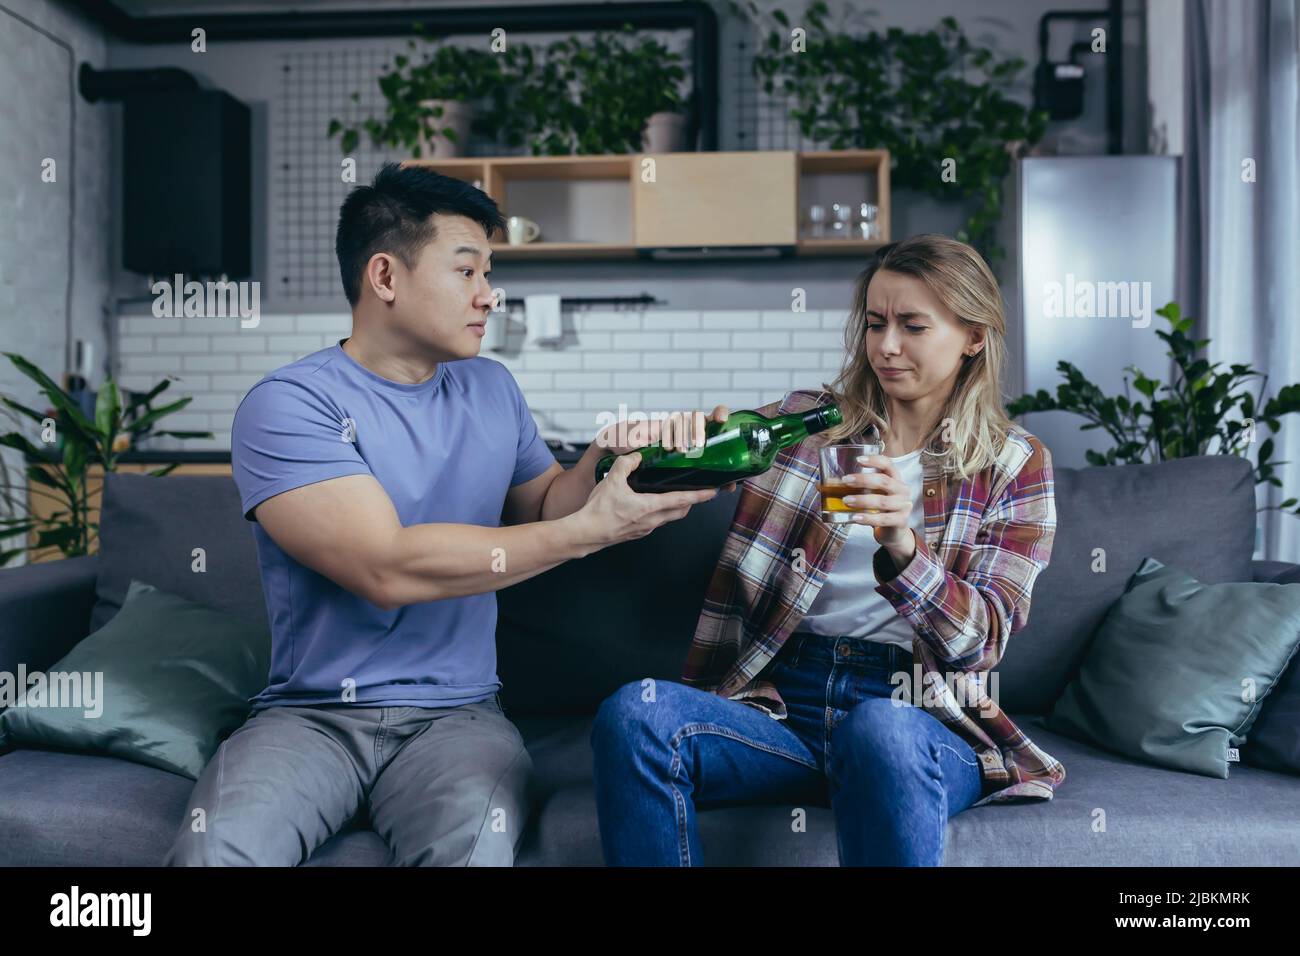 Alcoholic woman drinking hard alcohol at home, husband frustrated and annoyed, conflict in young family over alcohol Stock Photo